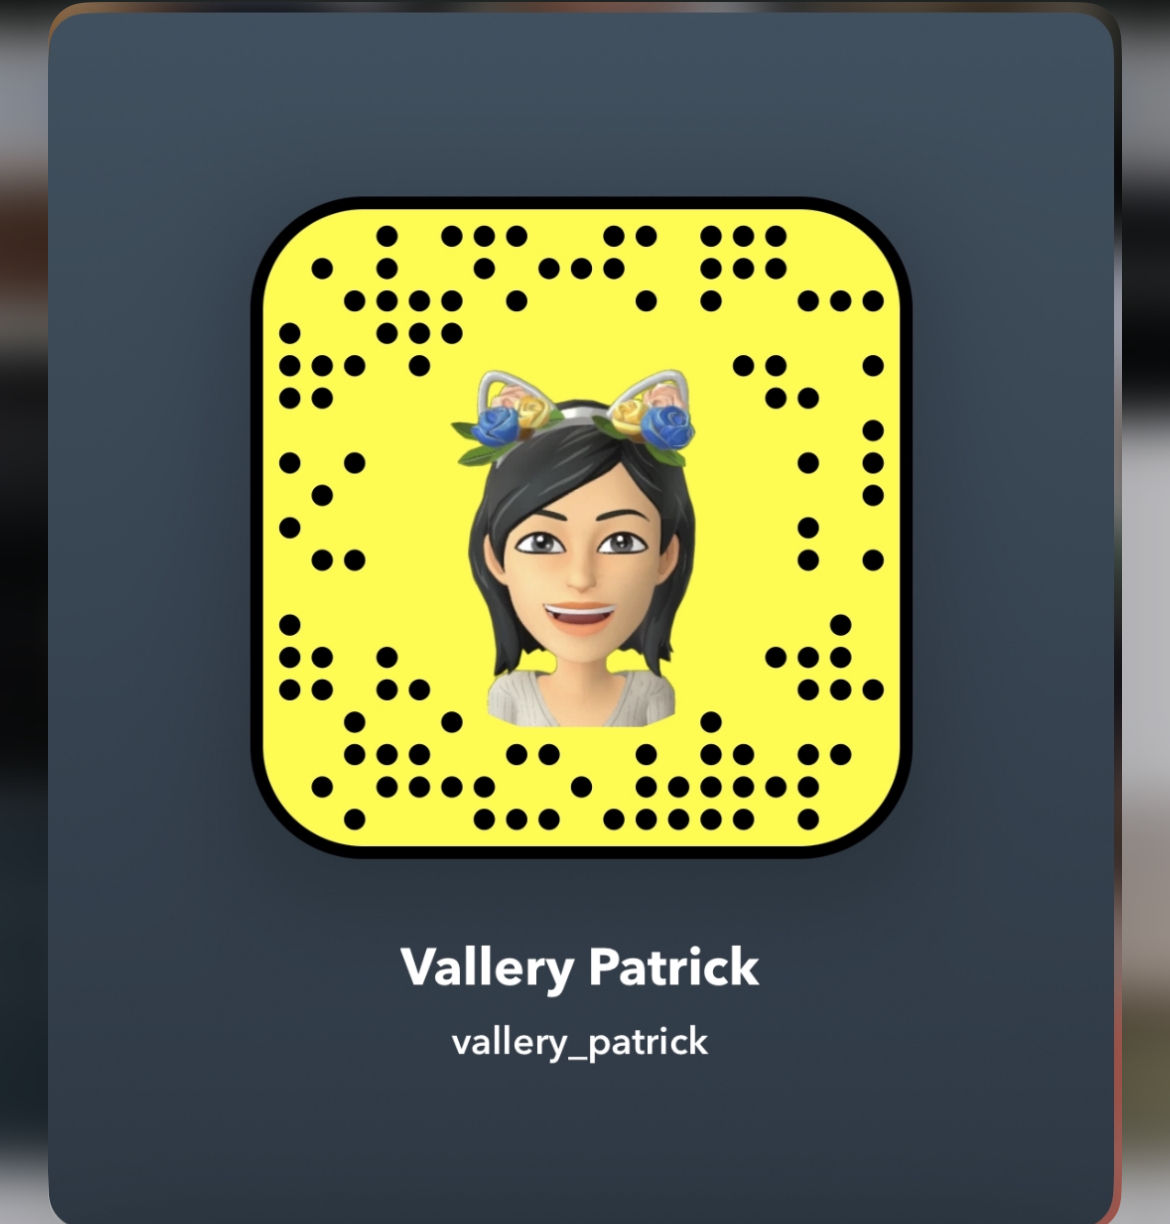 Escorts New Haven, Connecticut ❤️❤️I’m down for massage and body rubs I charge at cool rate snap me @vallery_Patrick❤️❤️